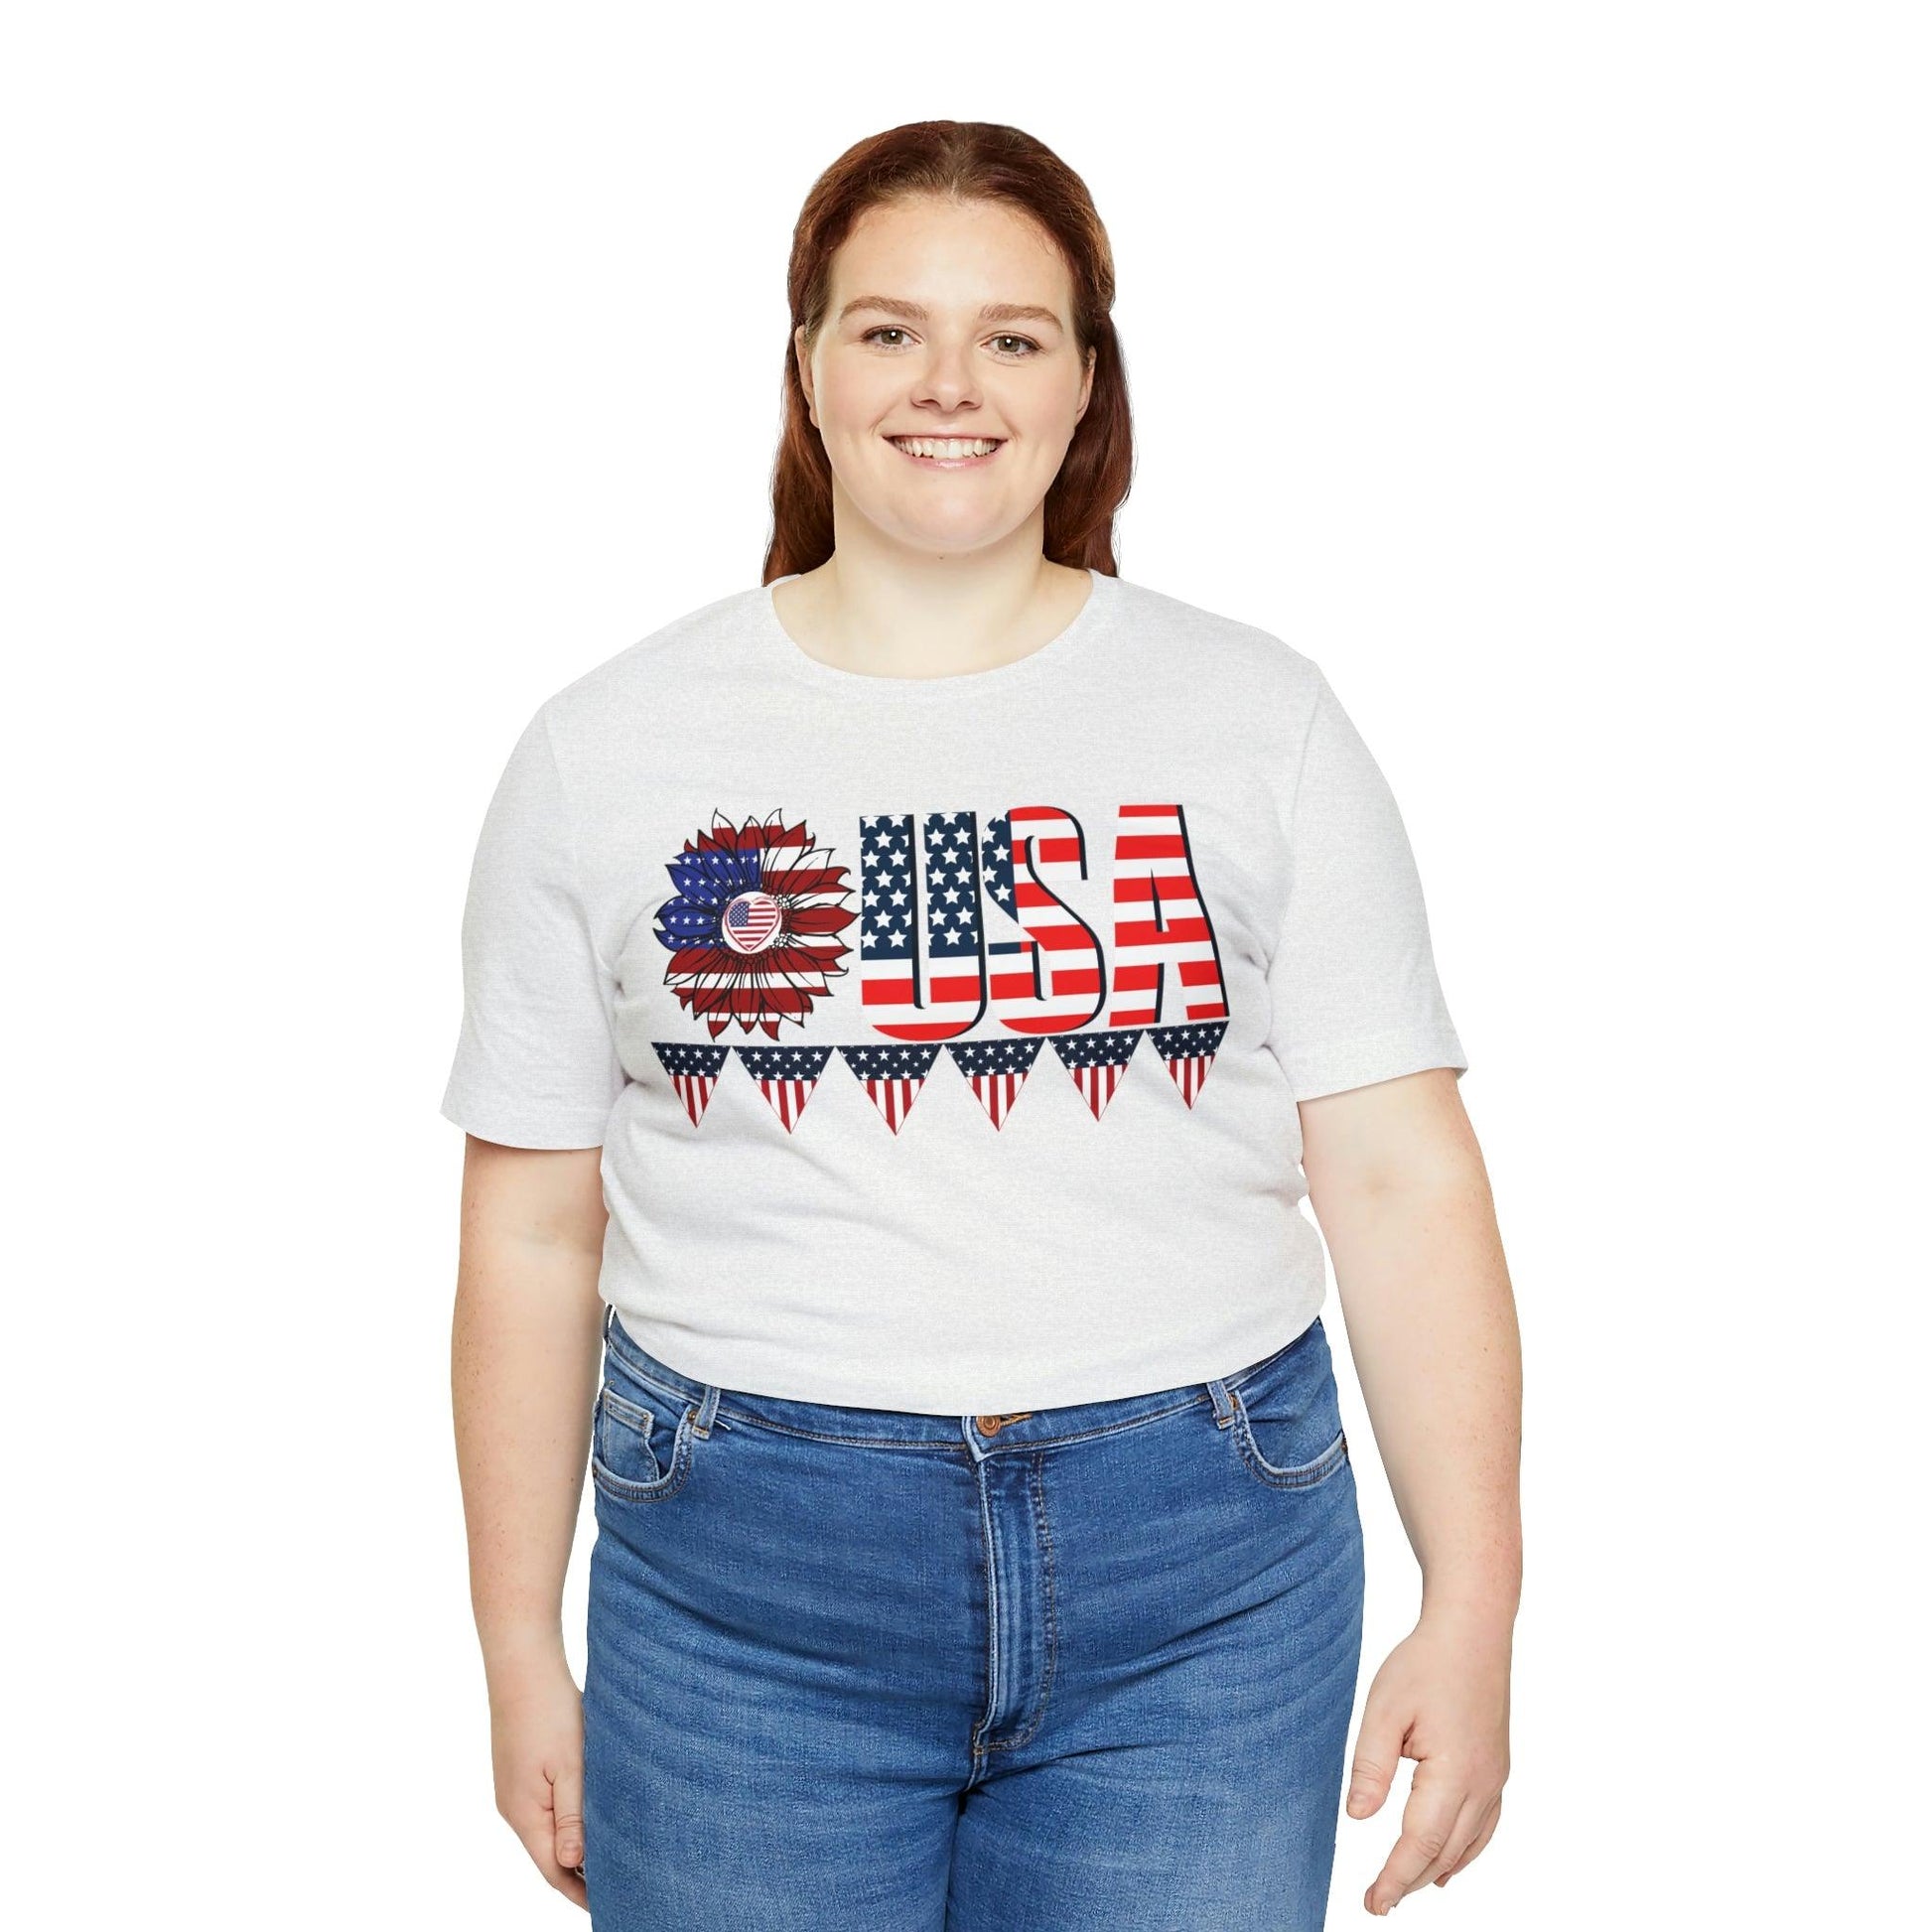 Flower USA American flag shirt, Red white and blue shirt, 4th of July shirt - Giftsmojo